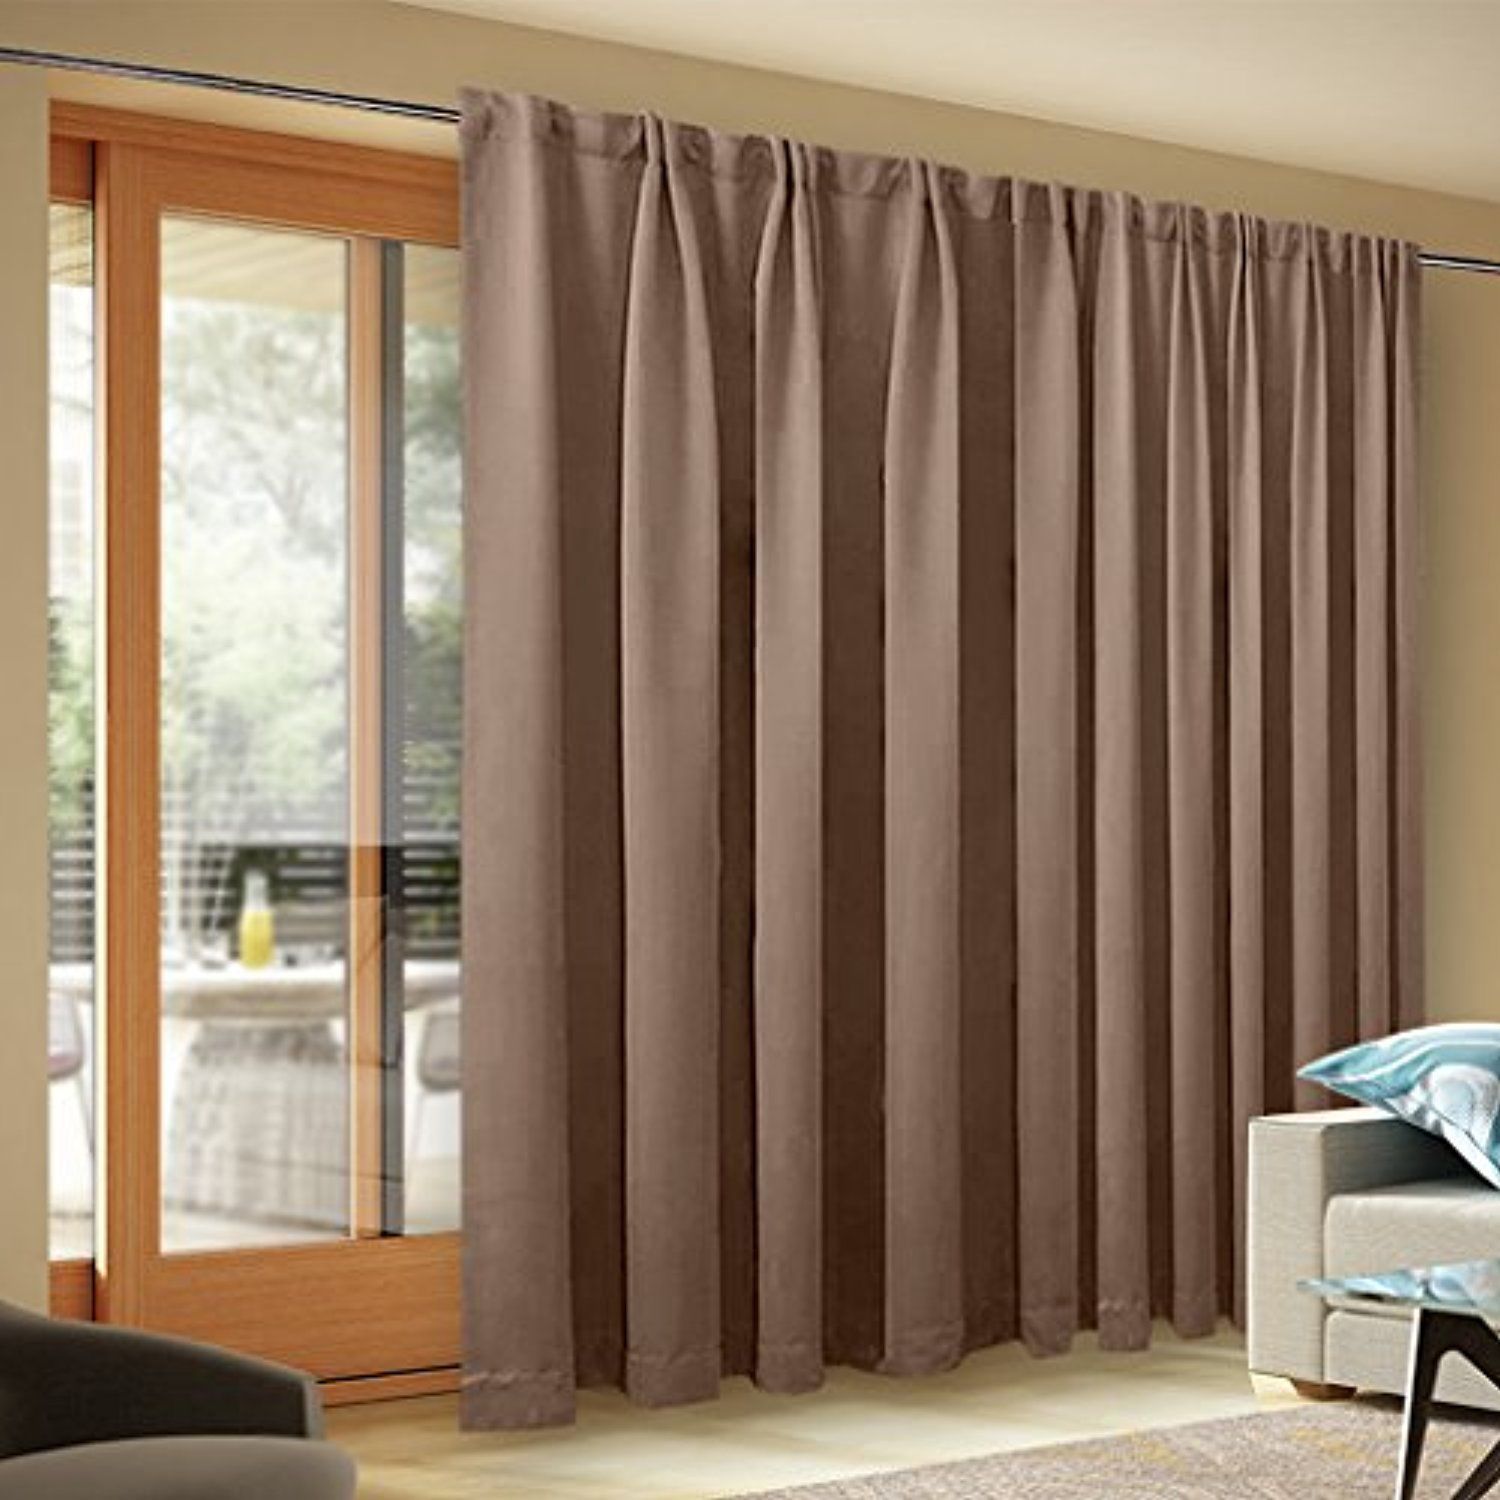 Best Of Blackout Patio Door Curtain Panel – Freshomedaily Intended For Thermaweave Blackout Curtains (View 28 of 30)